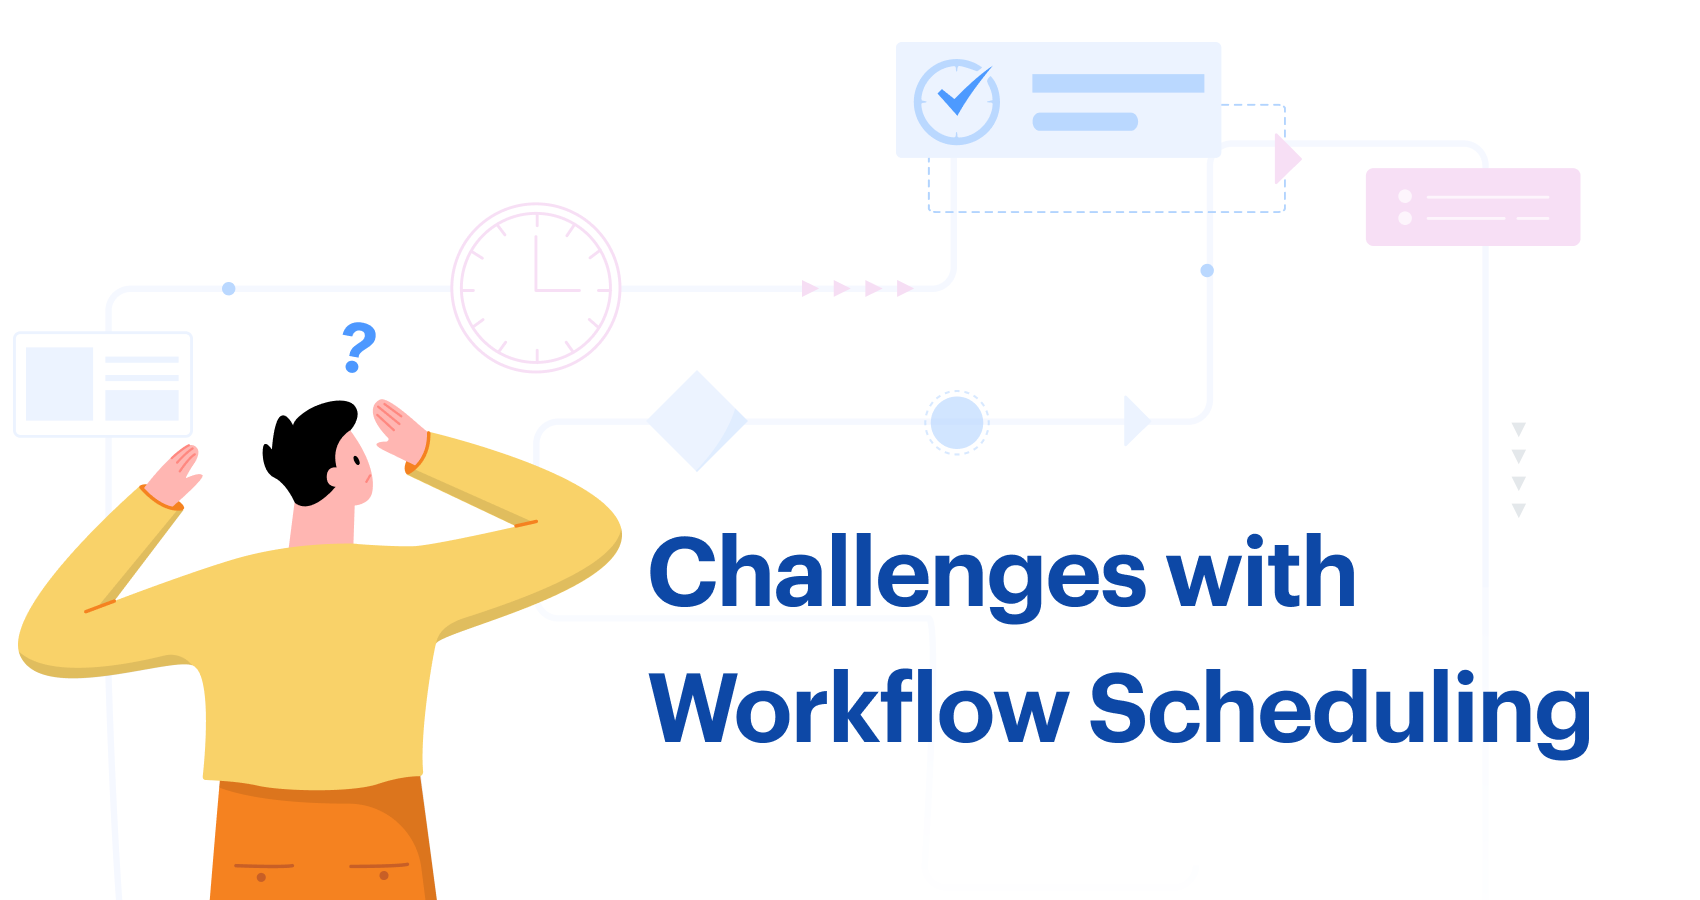 Challenges with Workflow Scheduling